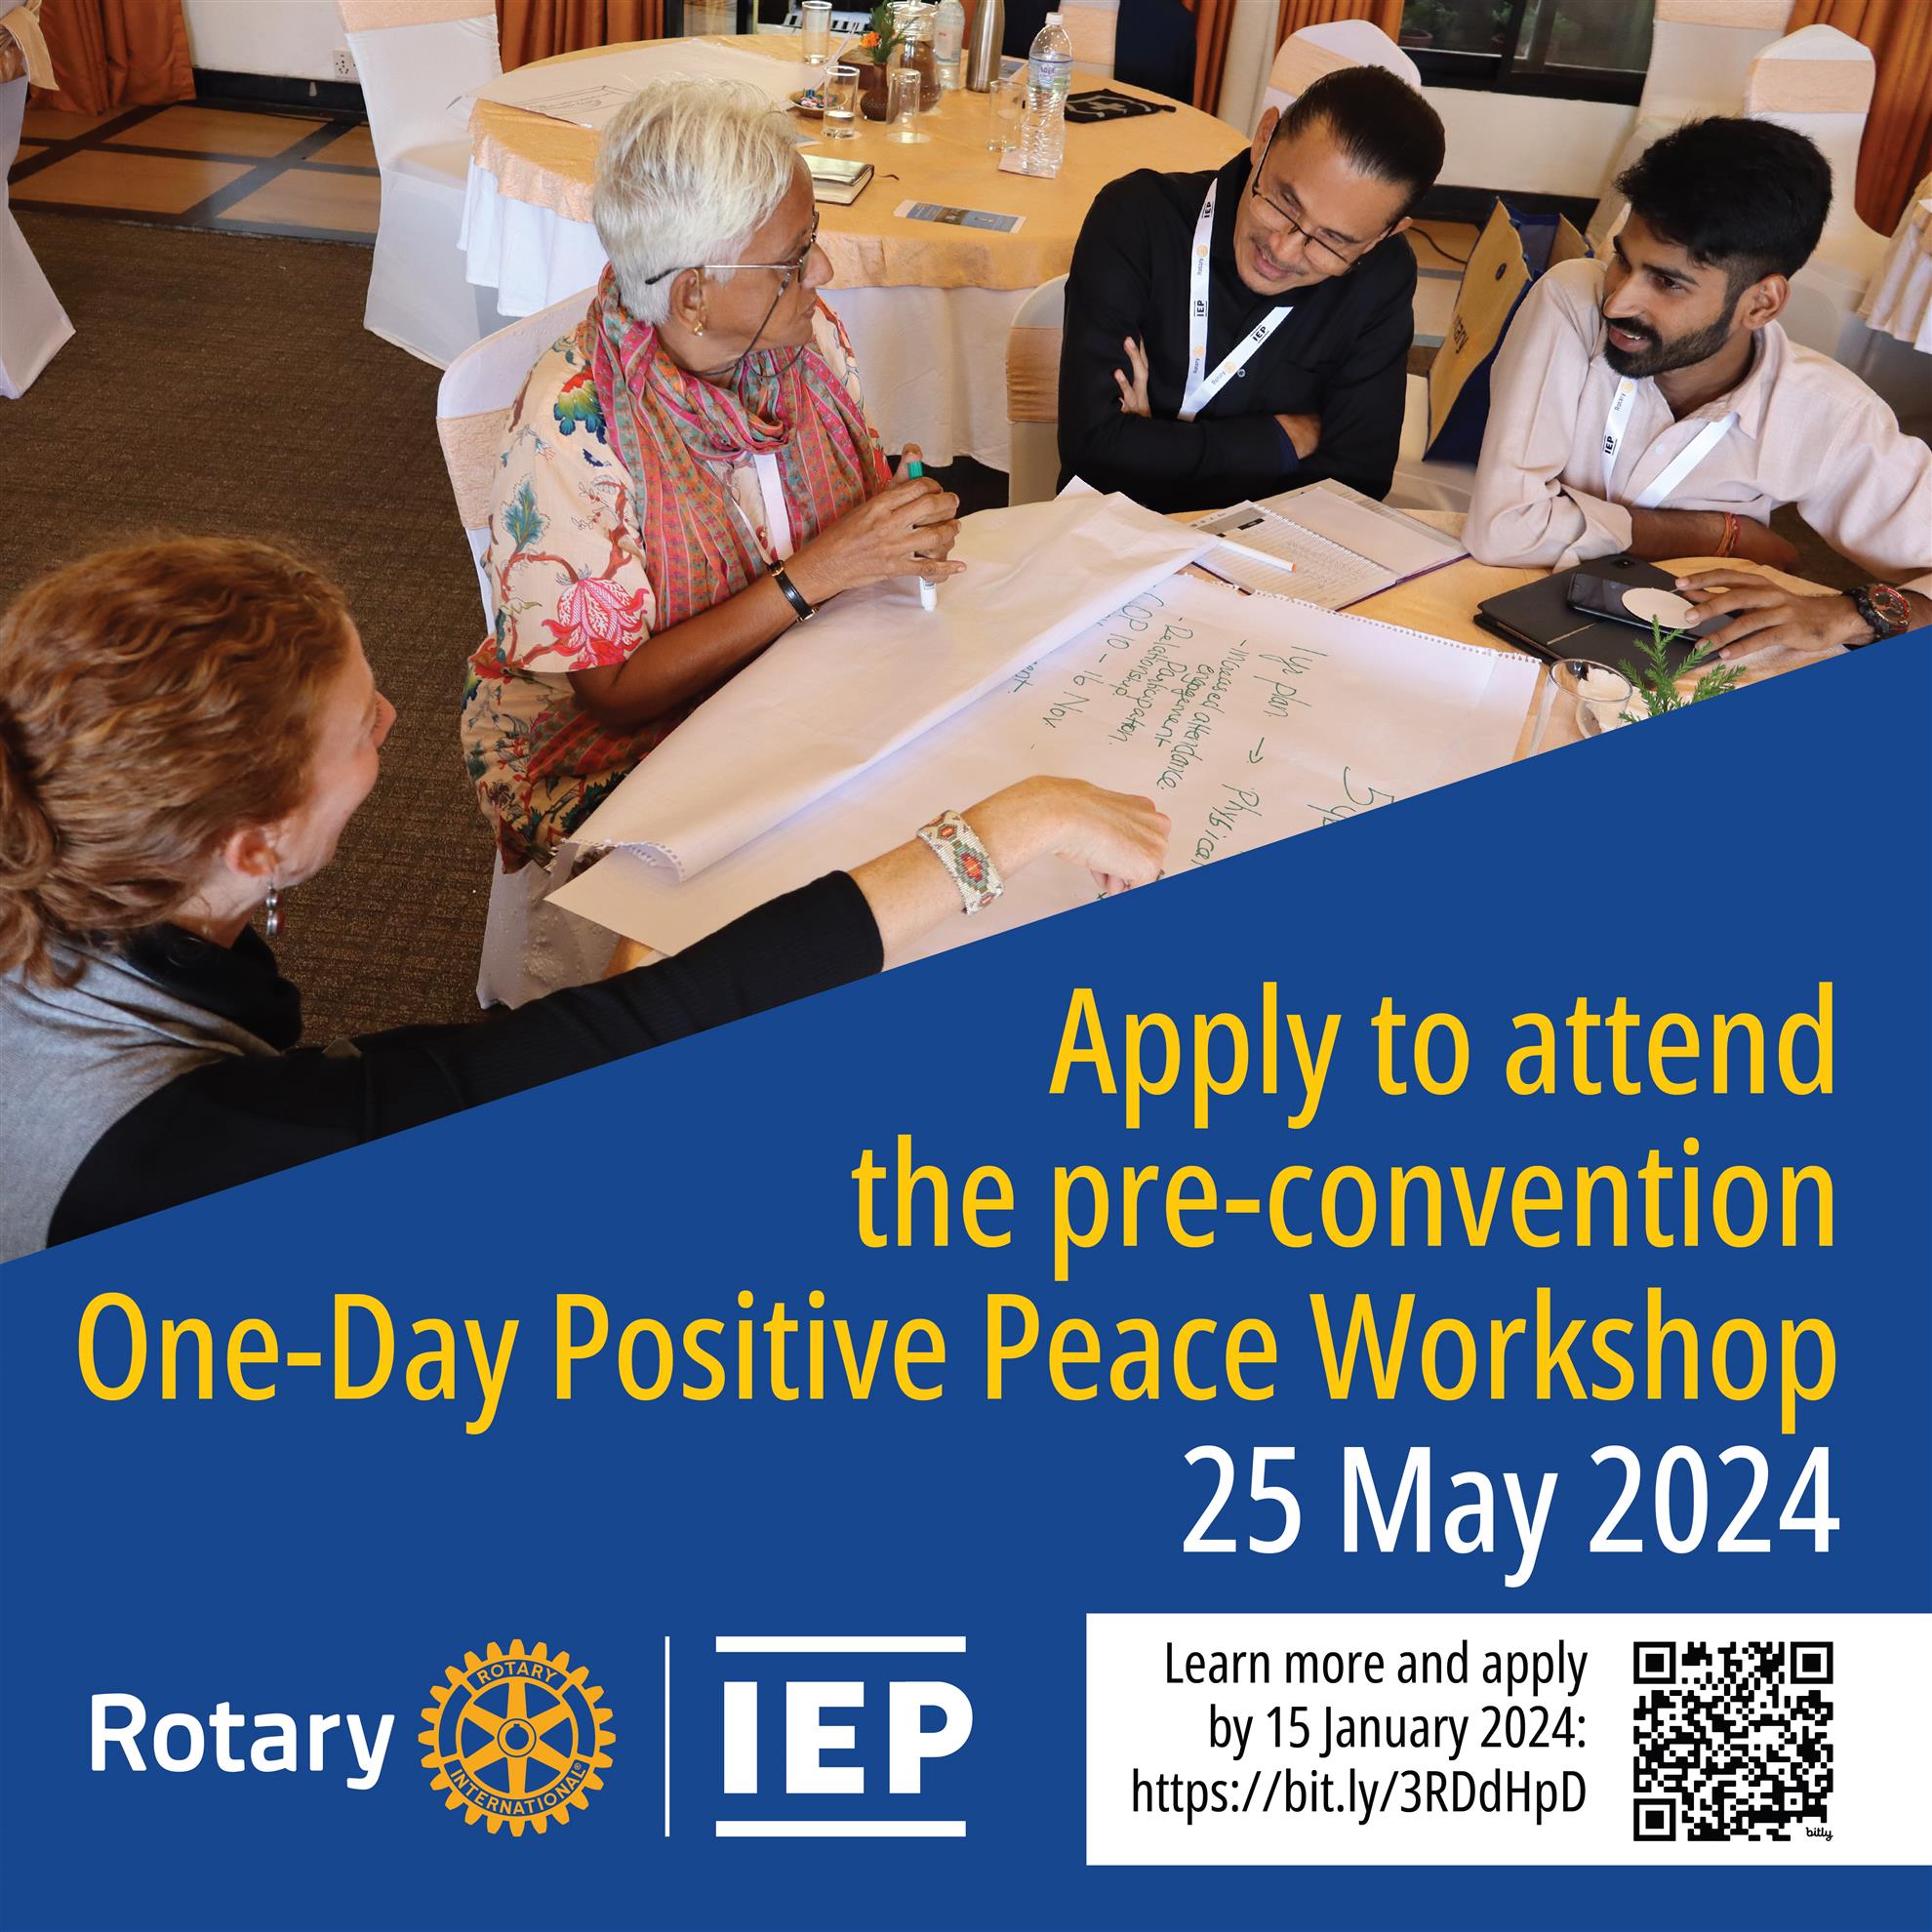 Invitation To Apply For One Day Positive Peace Workshop Rotary International Pre Convention